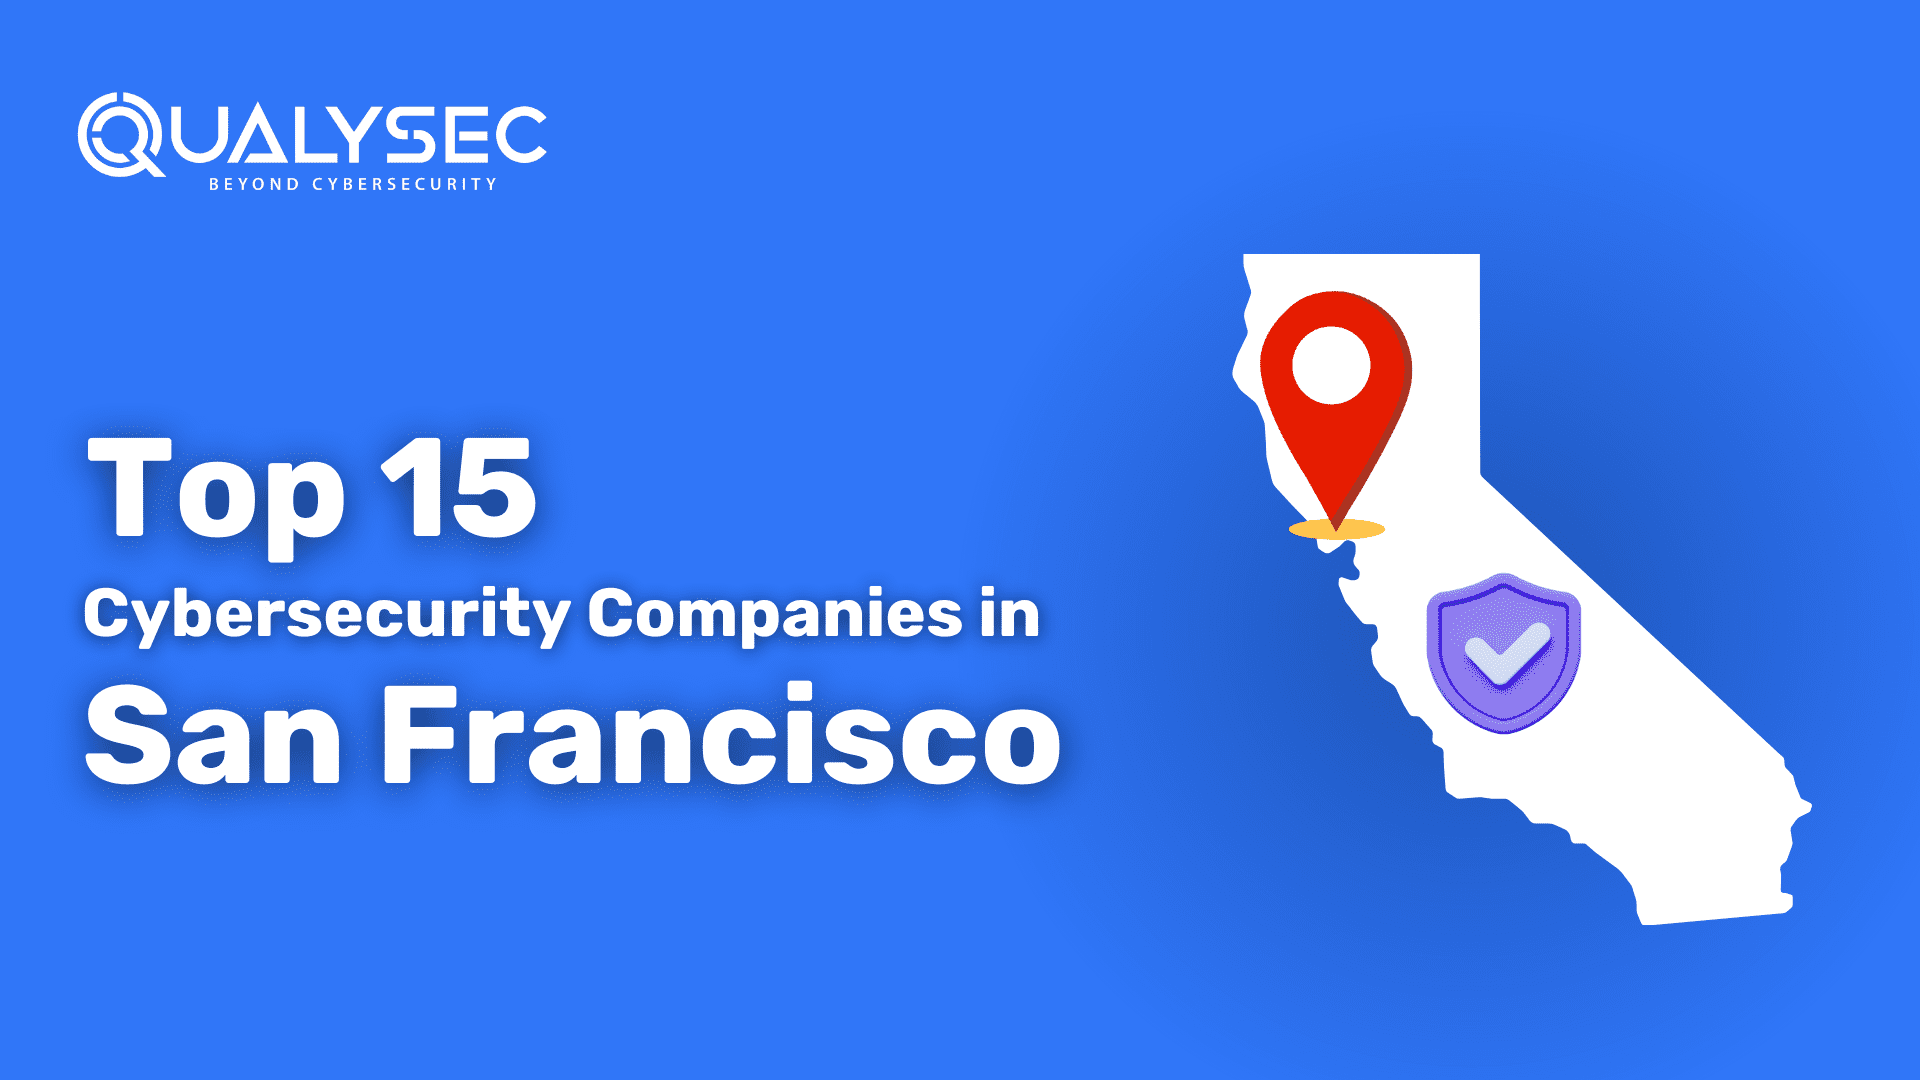 Top 15 Cybersecurity Companies in San Francisco